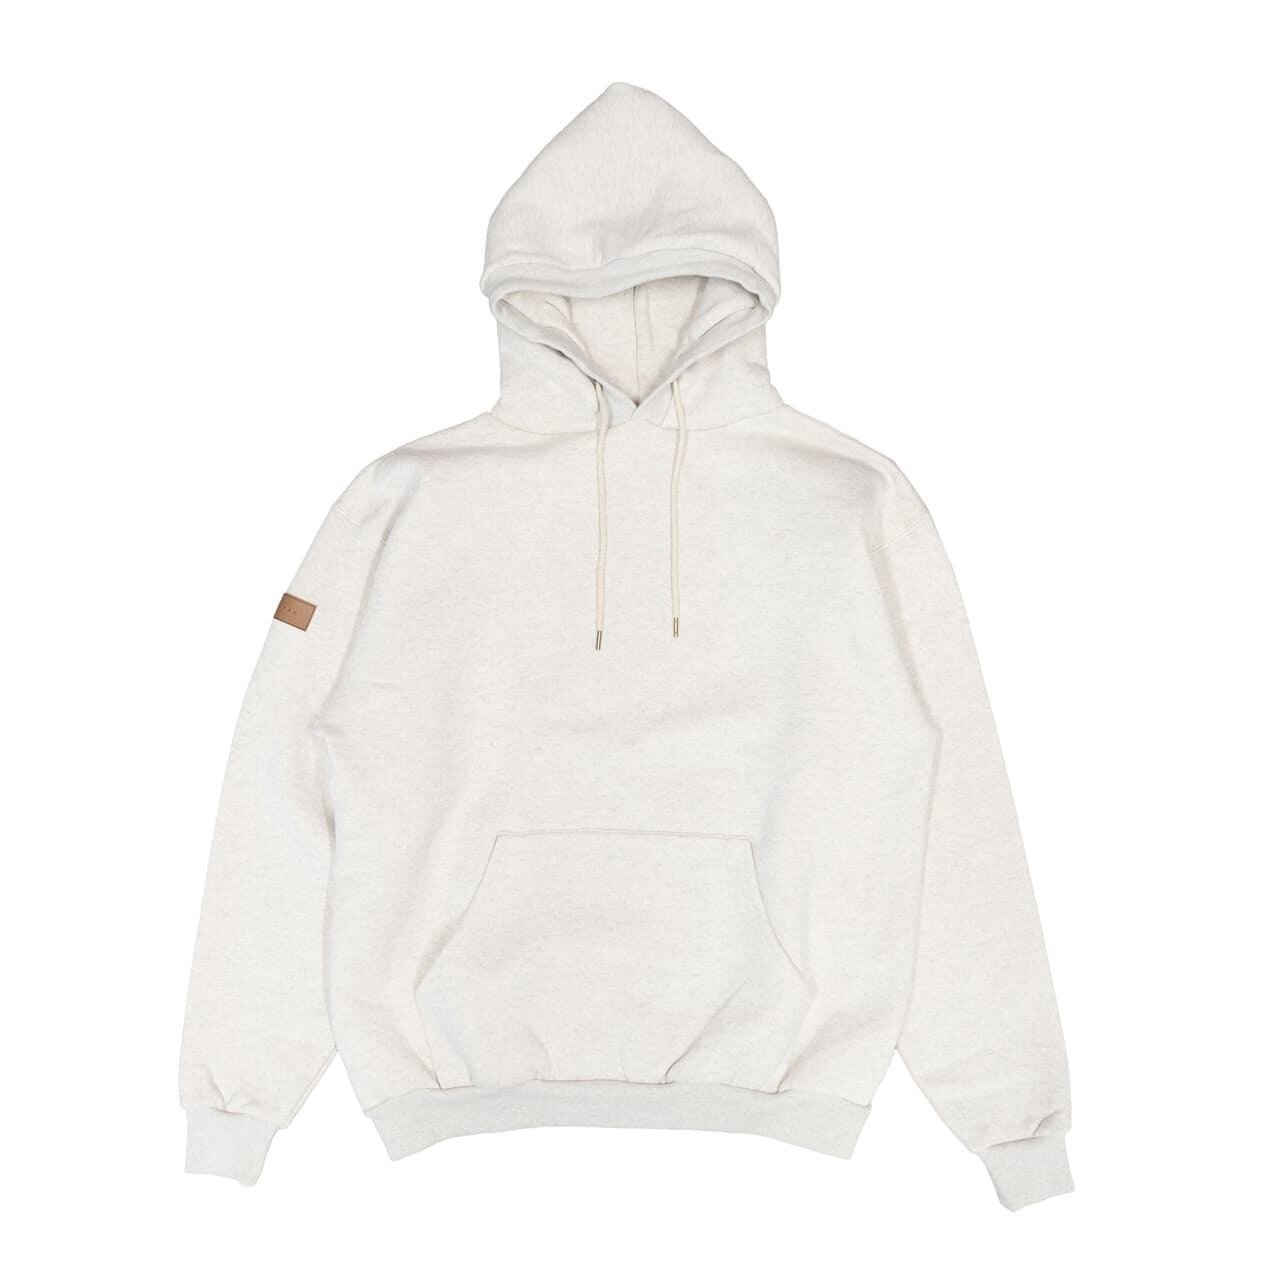 Hoodie / OFF WHITE | T-ASSAC OFFICIAL WEBSITE ｜ ティーエイサック